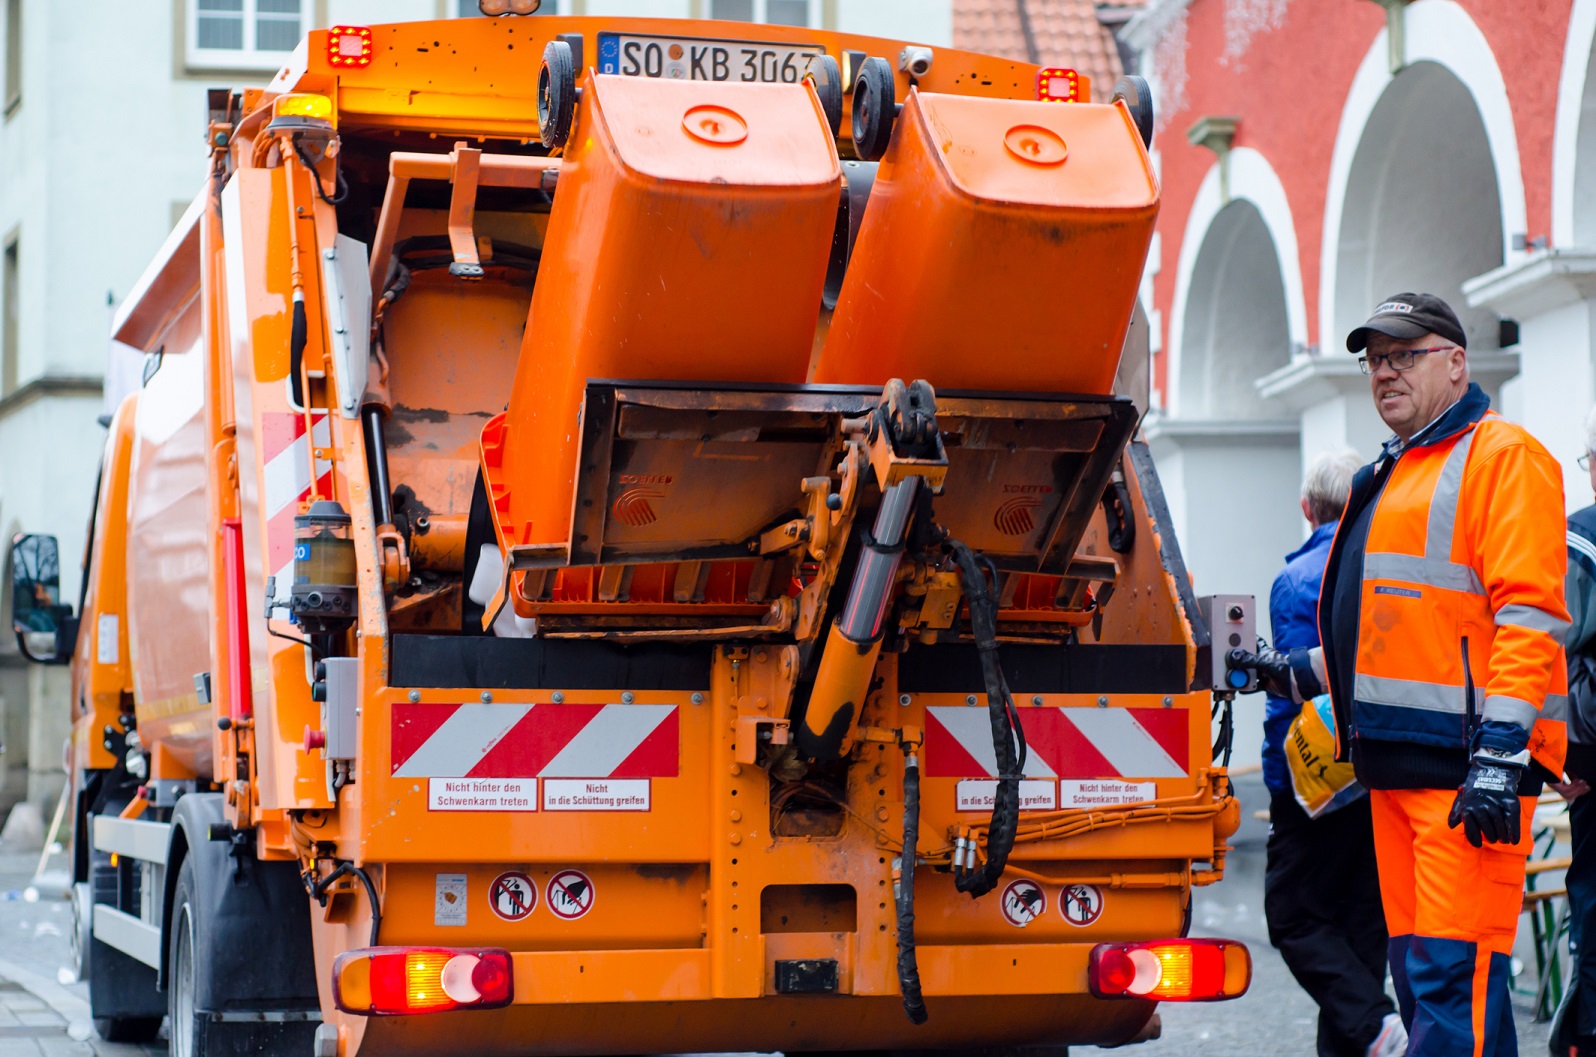 How a 'Smart' Trash Bin Can Transform City Garbage Collection - WSJ